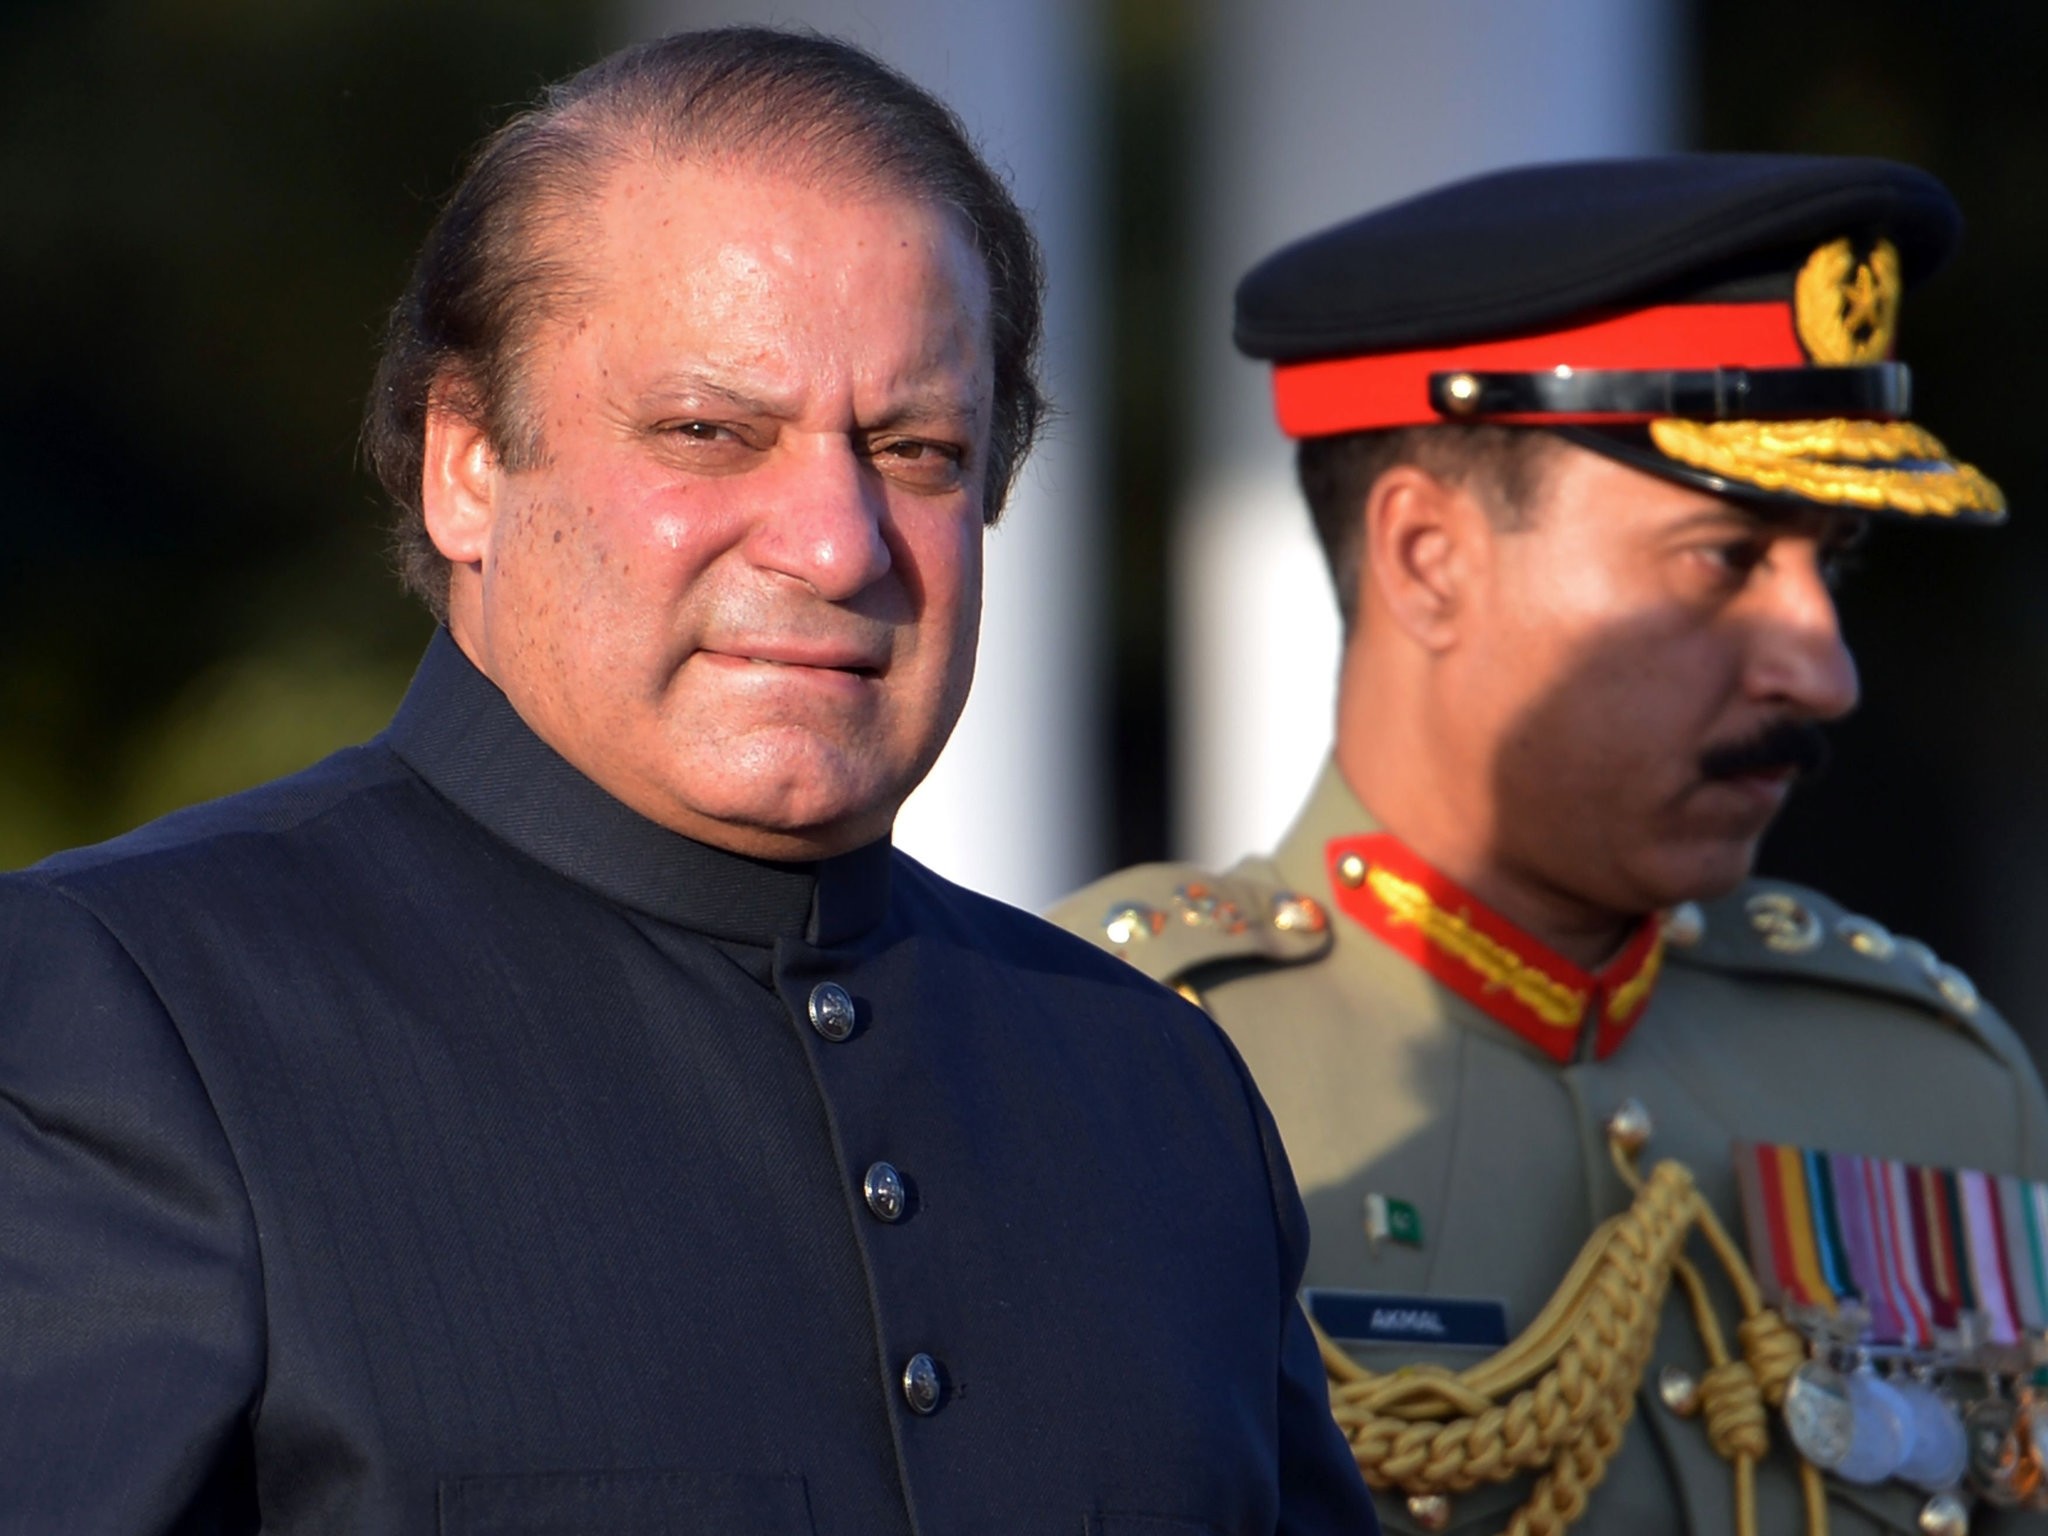 In this file photograph taken on June 5, 2013, Pakistani Prime Minister Nawaz Sharif arrives to inspect a guard of honour during a welcoming ceremony at the Prime Minister's House in Islamabad. (AFP Photo)